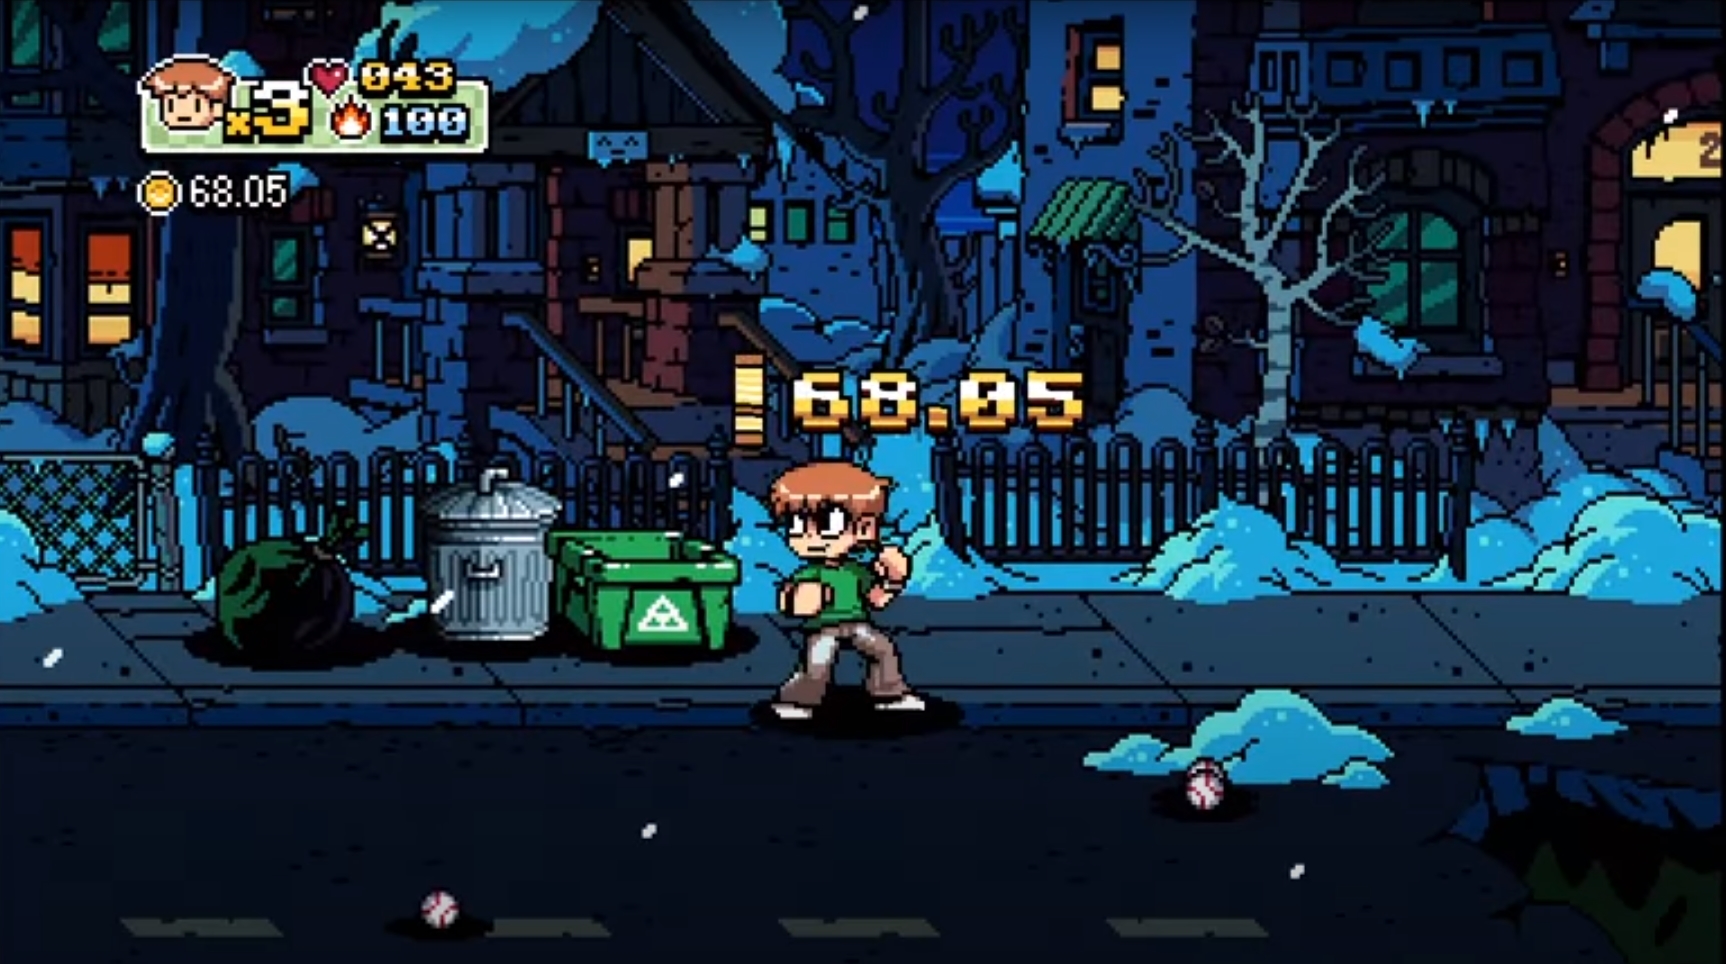 Scott Pilgrim Vs. The World: The Game Is Returning After Nearly Six Years!